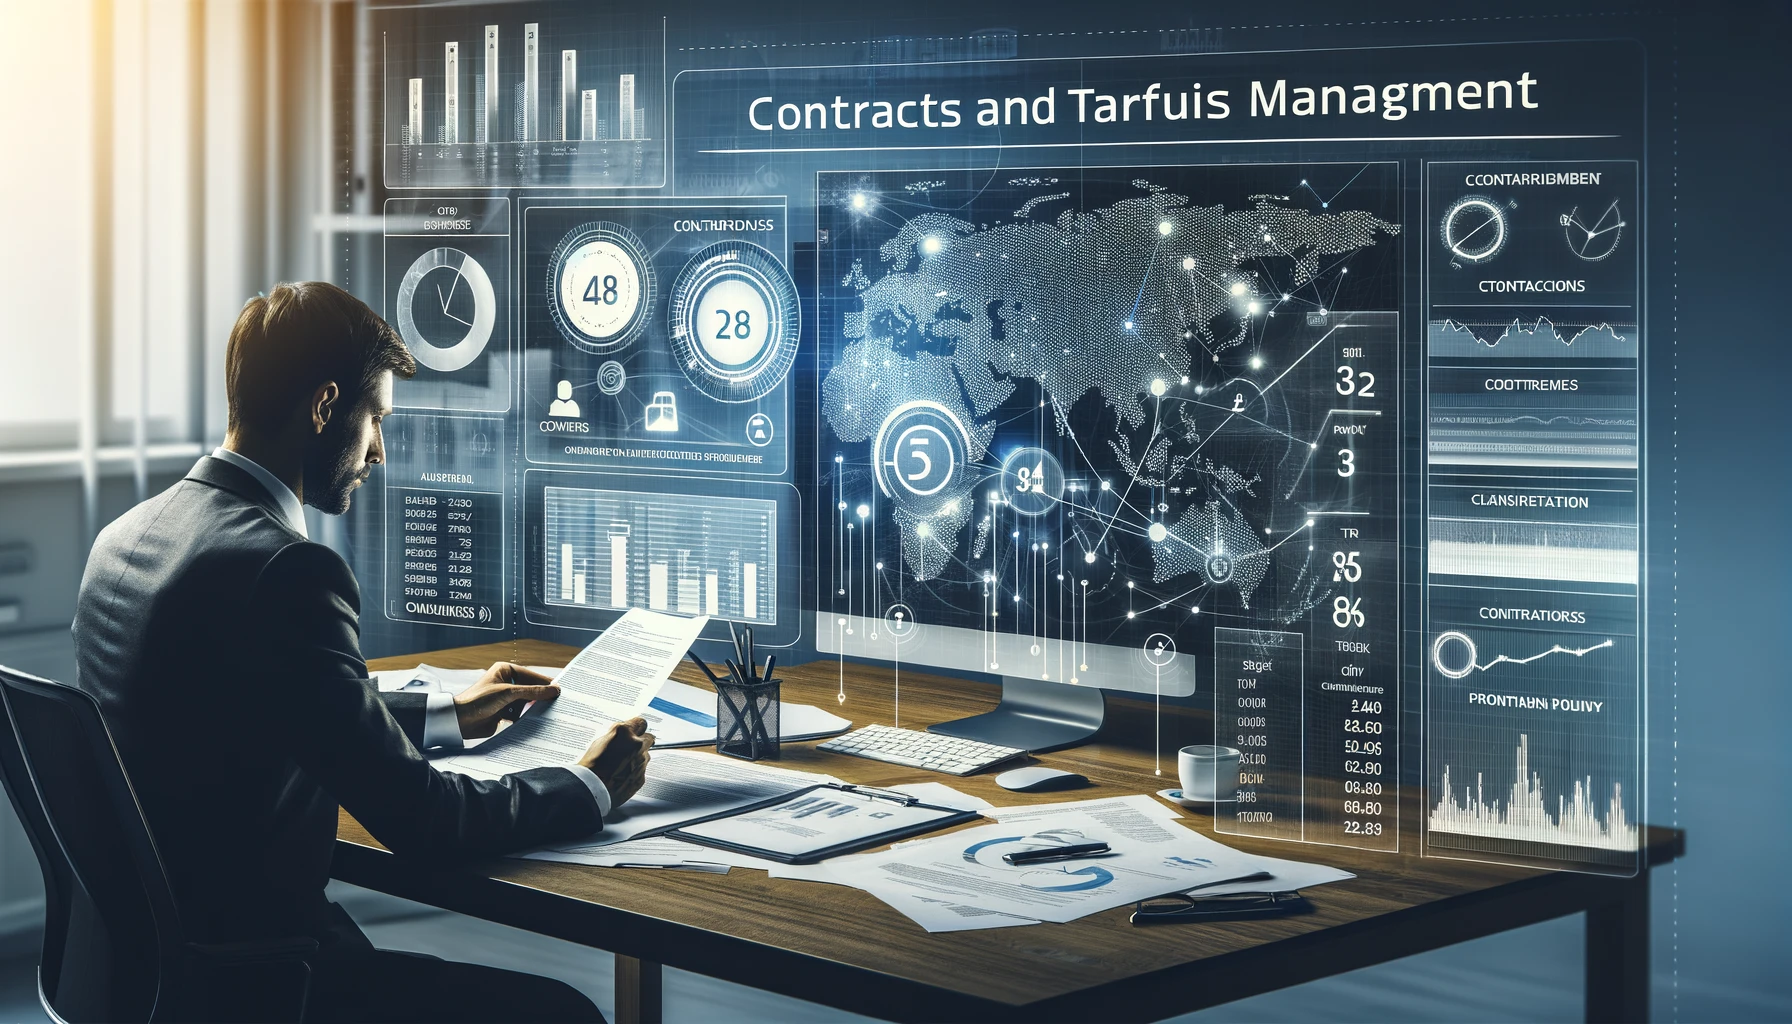 DALL·E 2024-04-12 15.00.42 - An office scene displaying the concept of contracts and tariffs management. The image should show a professional working at a desk, examining document